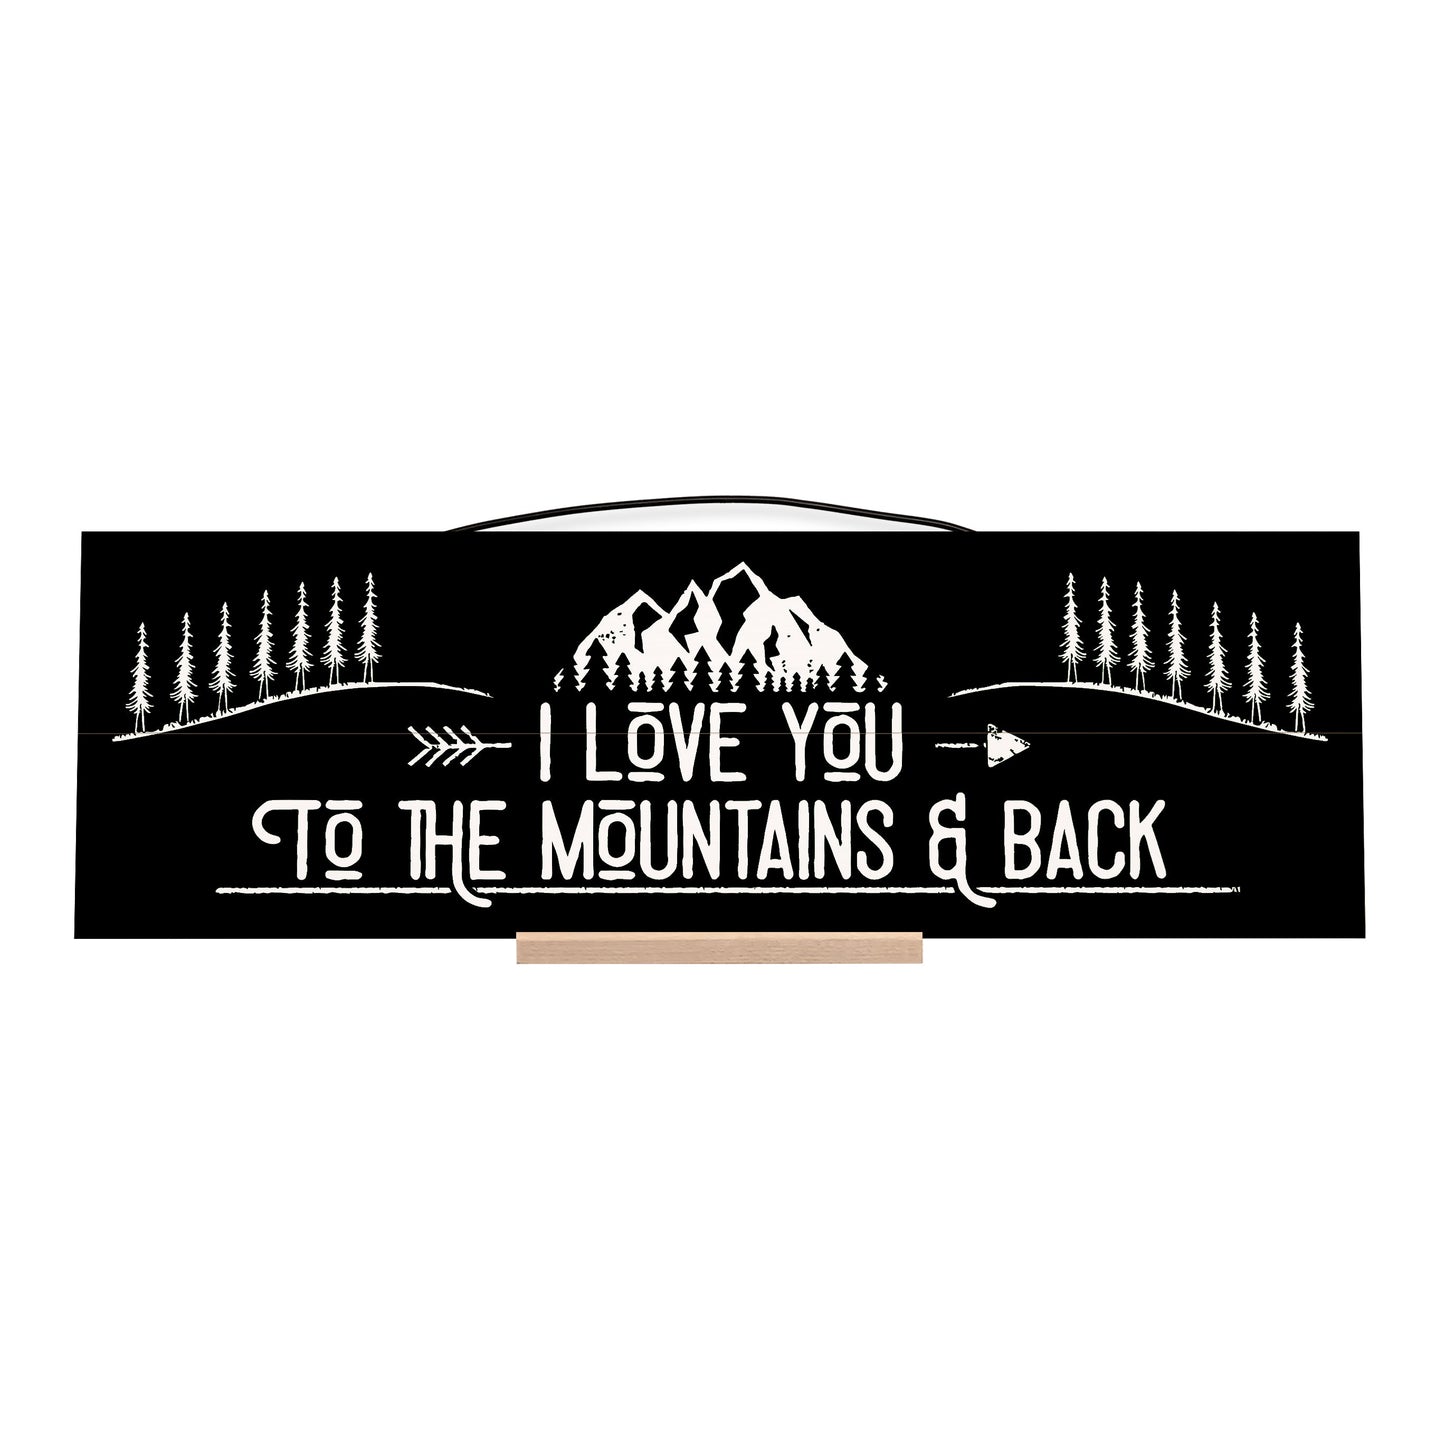 I Love You to The Mountains and Back.